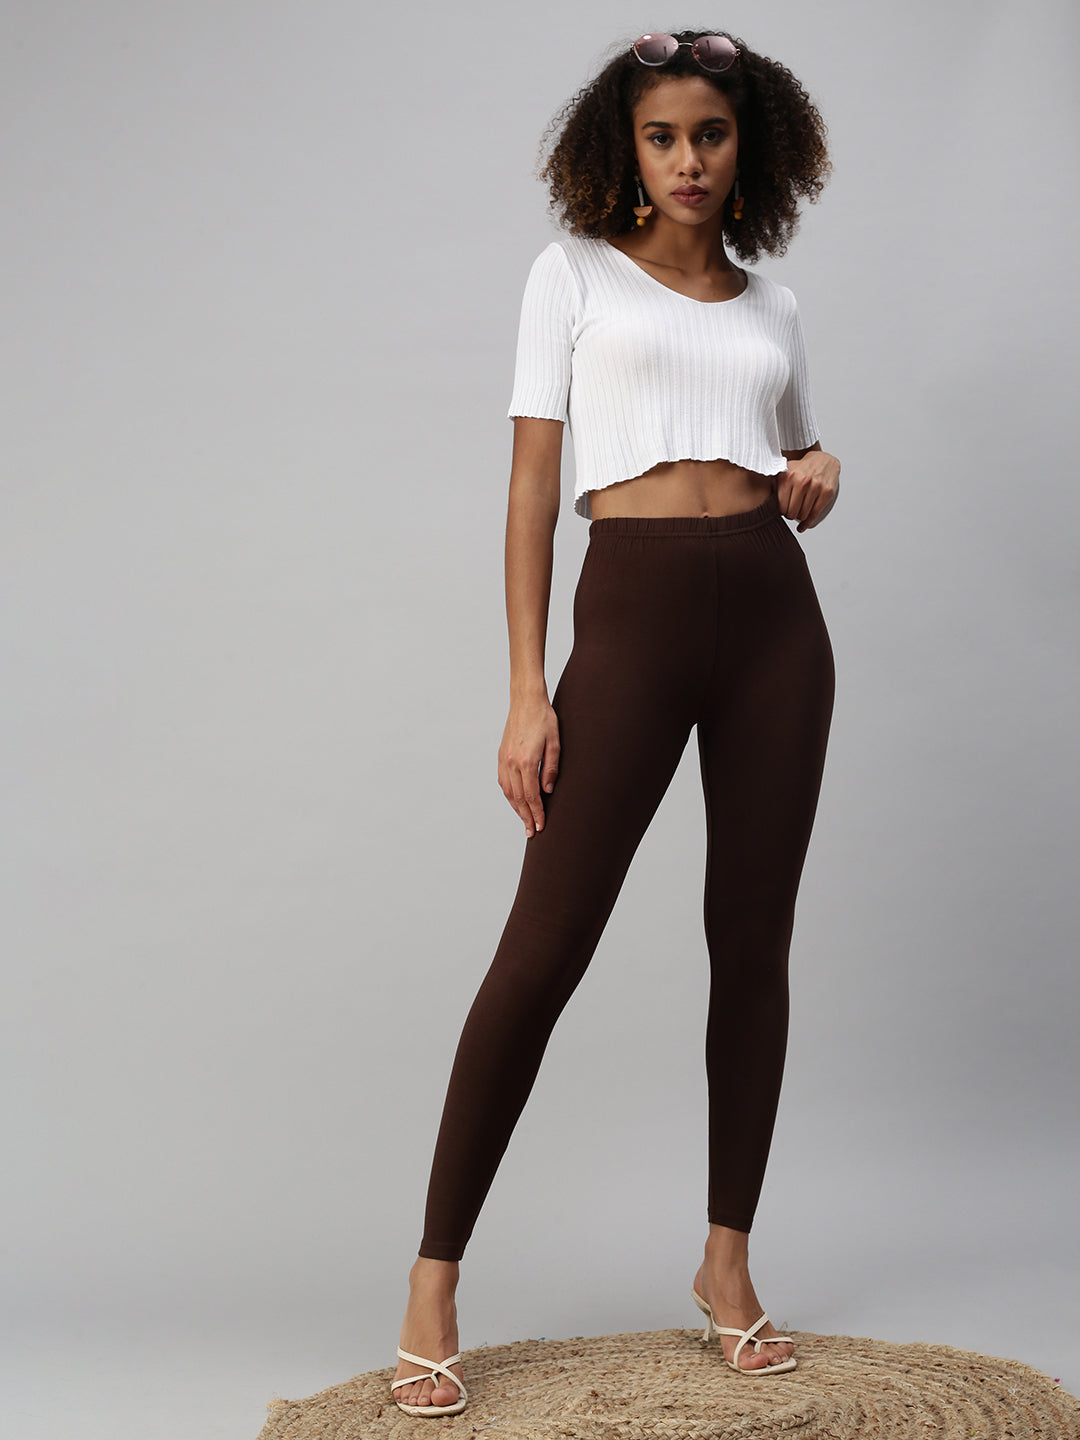 Shop Prisma's Brown Ankle Leggings for Comfortable Style